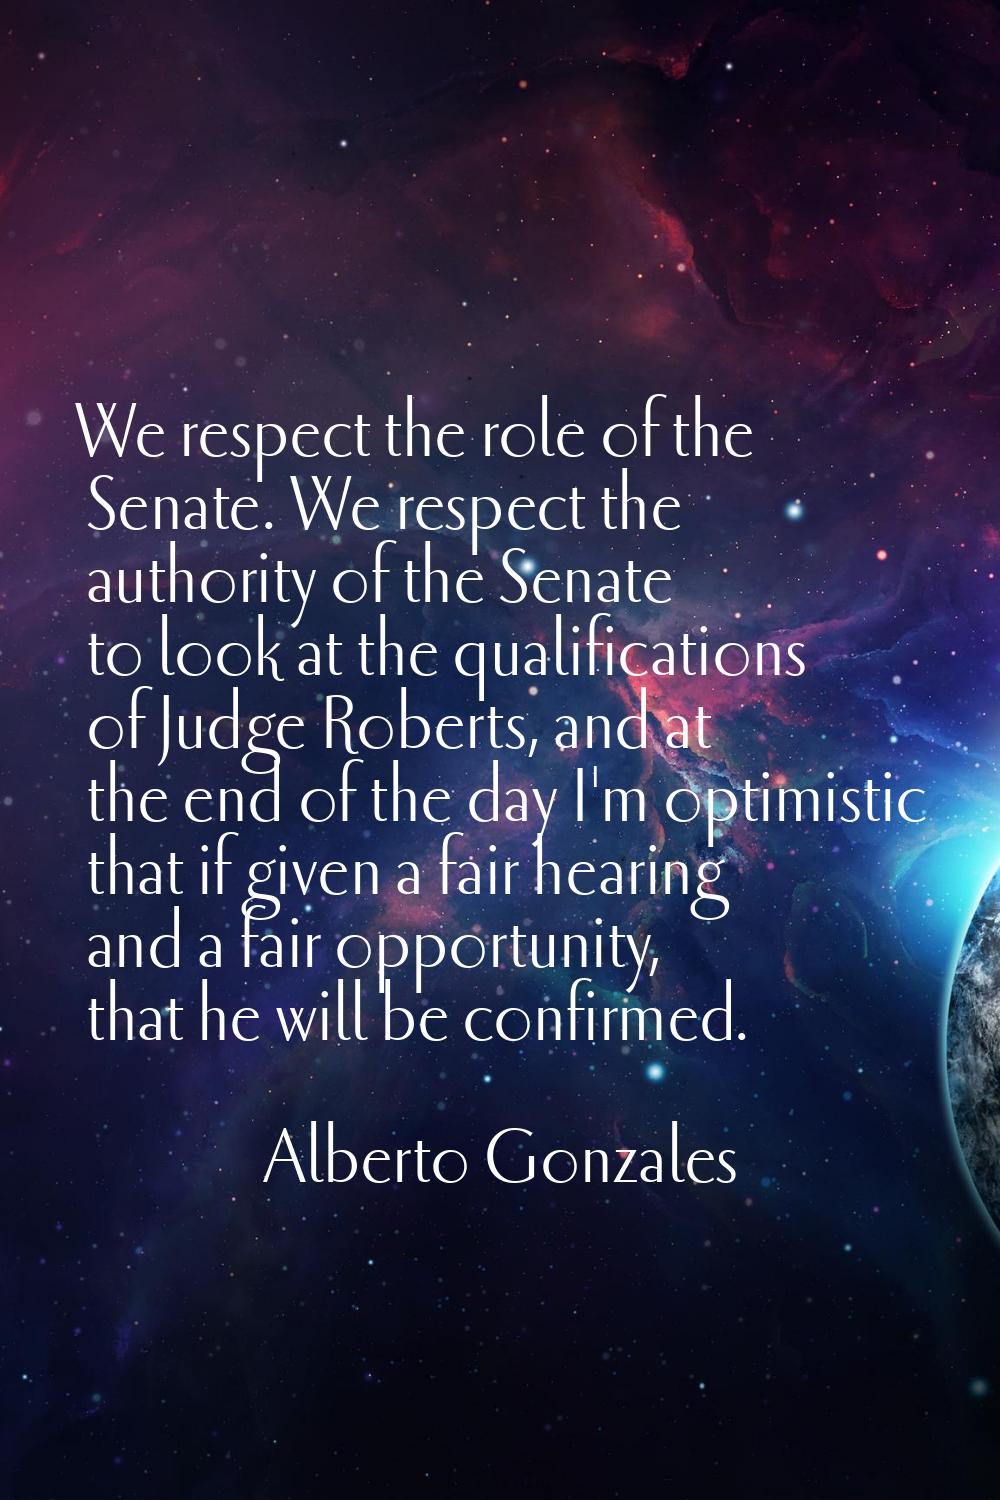 We respect the role of the Senate. We respect the authority of the Senate to look at the qualificat